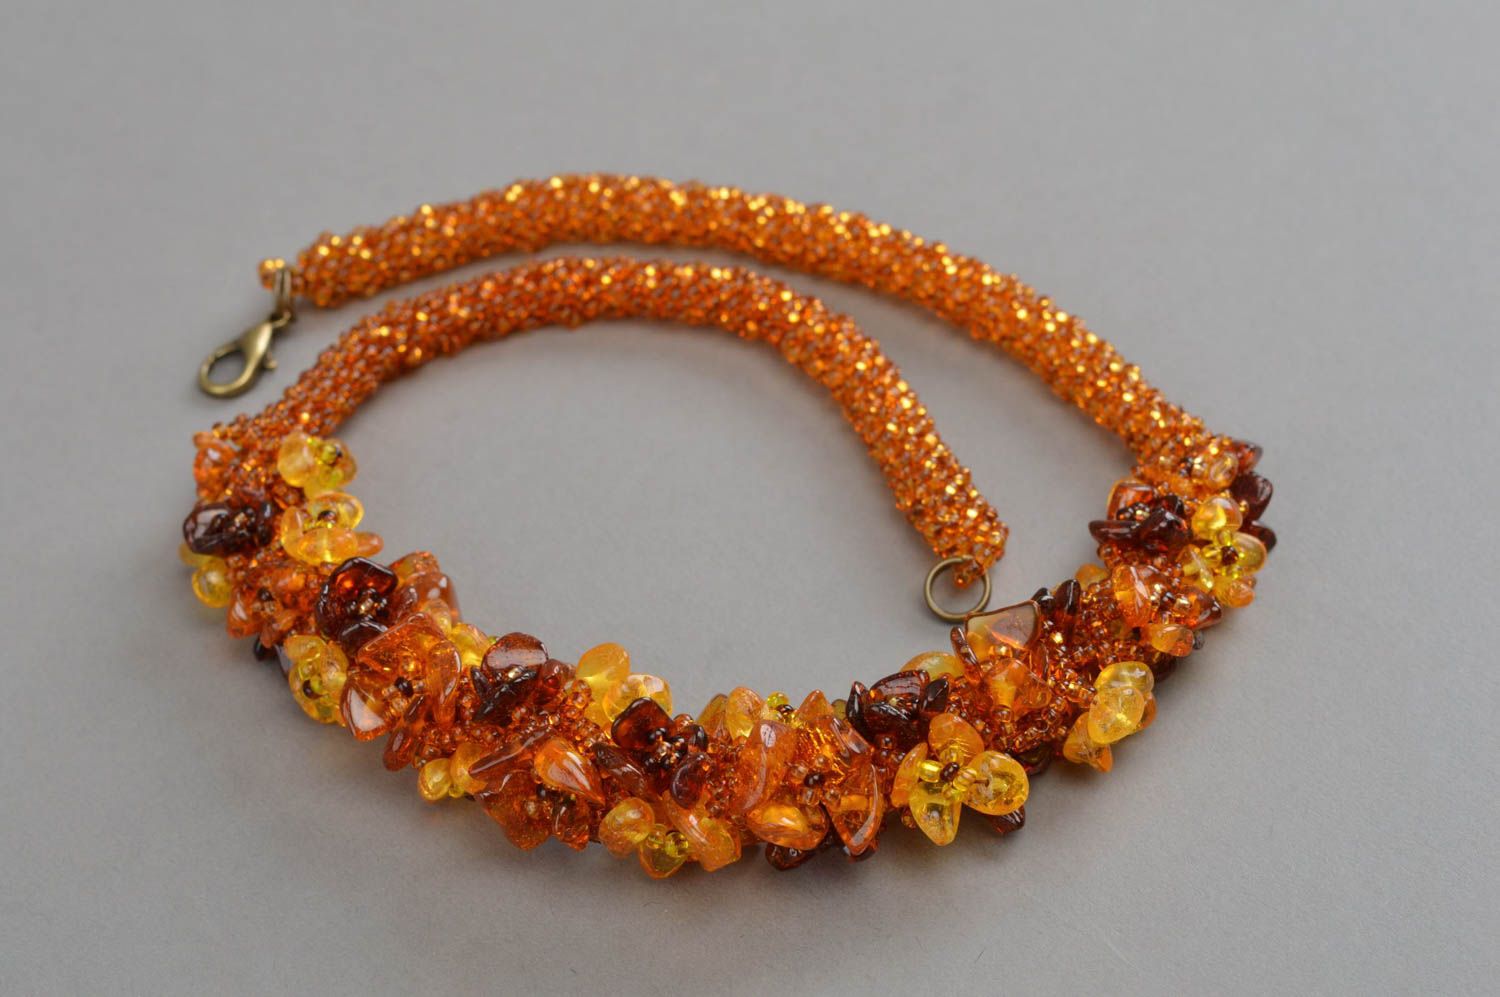 Amber necklace with beads handmade designer accessory made of natural stones photo 2